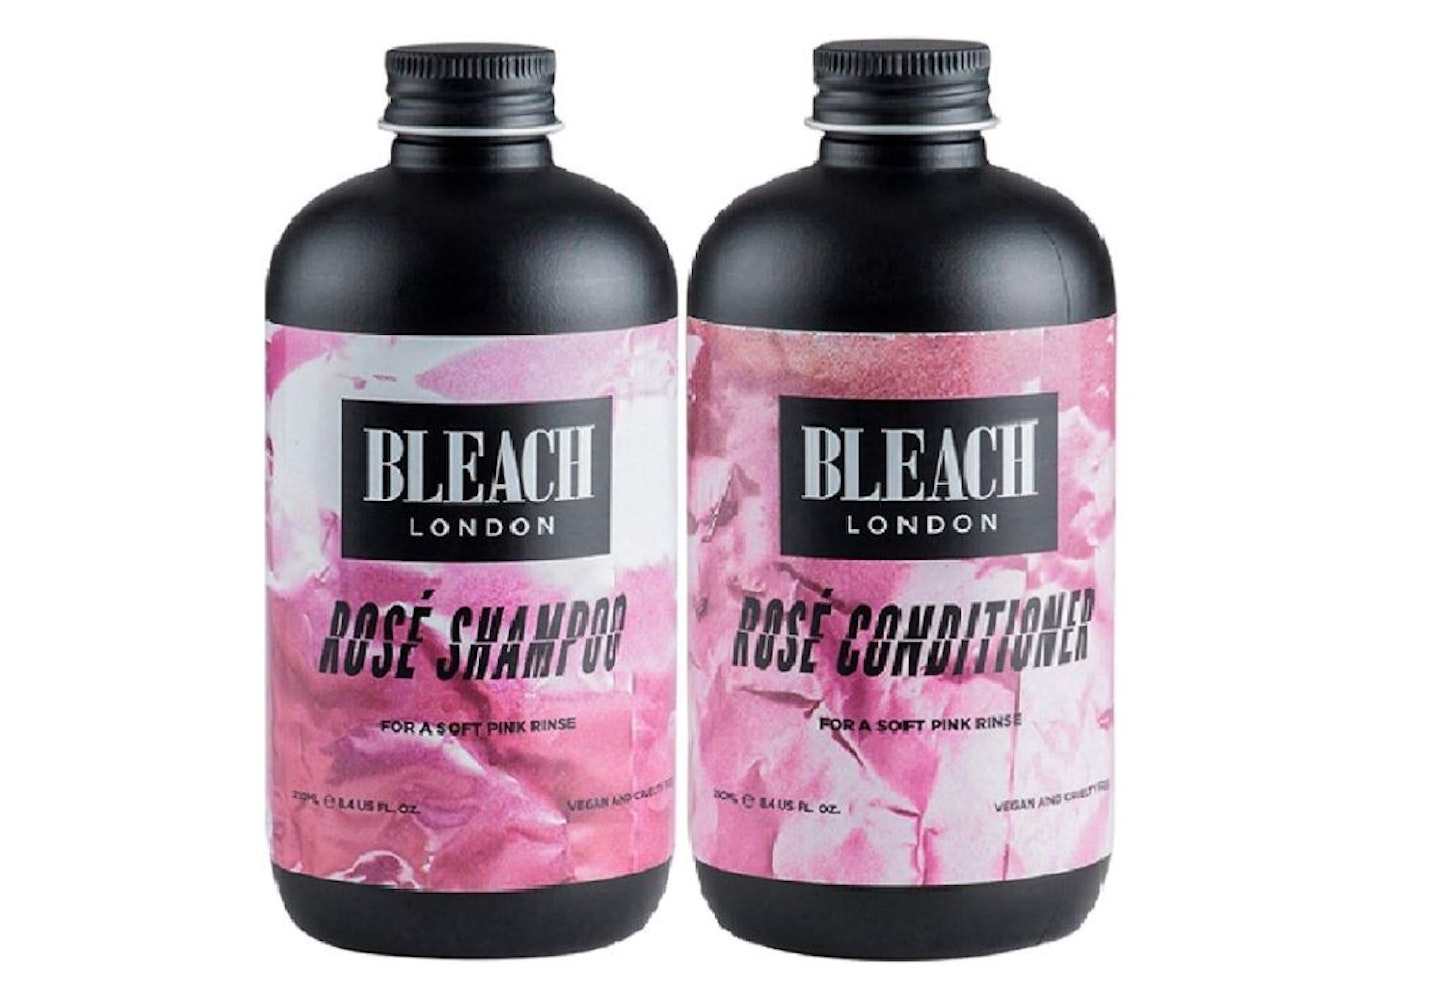 Bleach London Rose Shampoo and Conditioner, £16.85